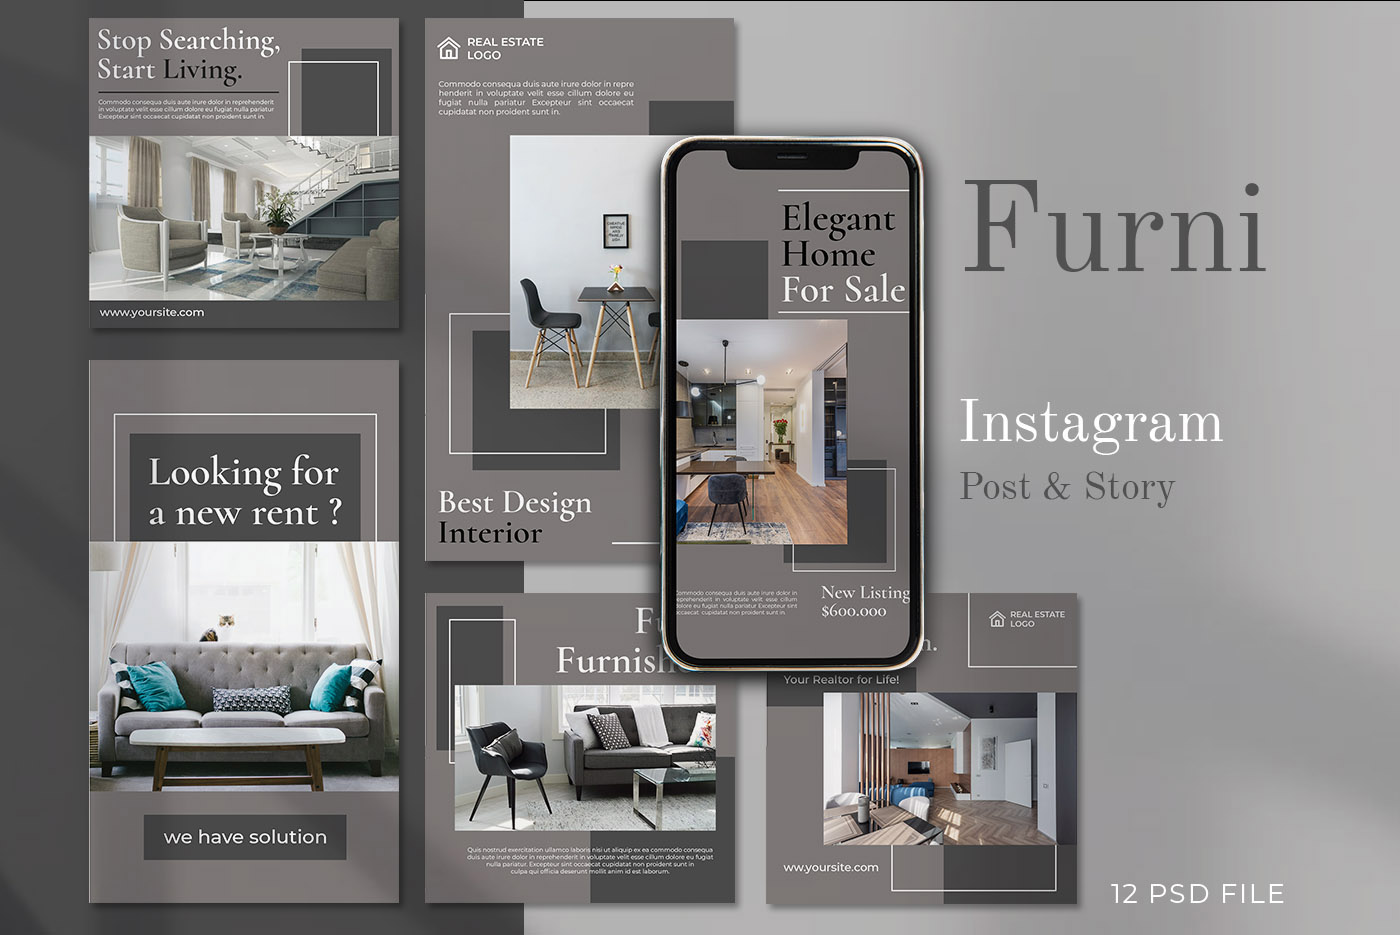 FURNI - Social Media Post and Instagram Story Template